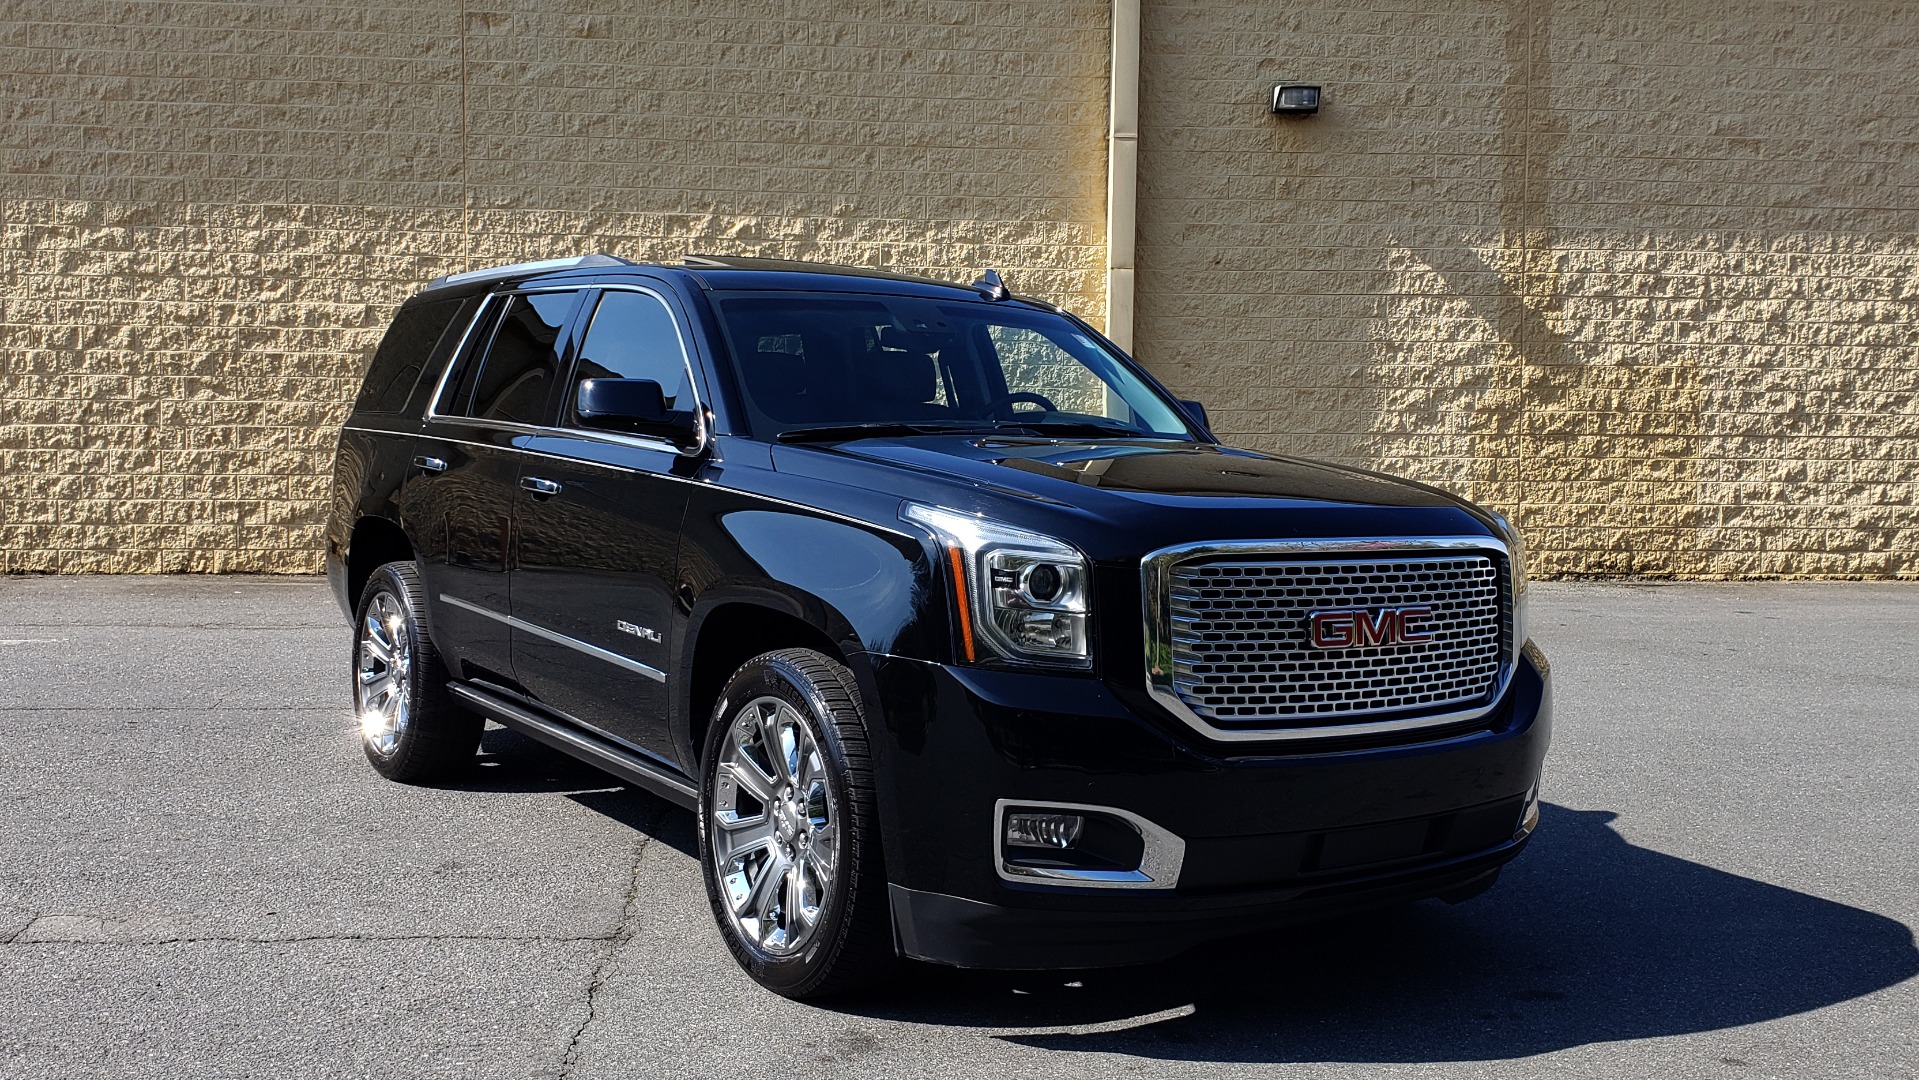 Used 2016 GMC YUKON DENALI 4WD / OPEN ROAD / NAV / ENTERTAINMENT / 3-ROW for sale Sold at Formula Imports in Charlotte NC 28227 4